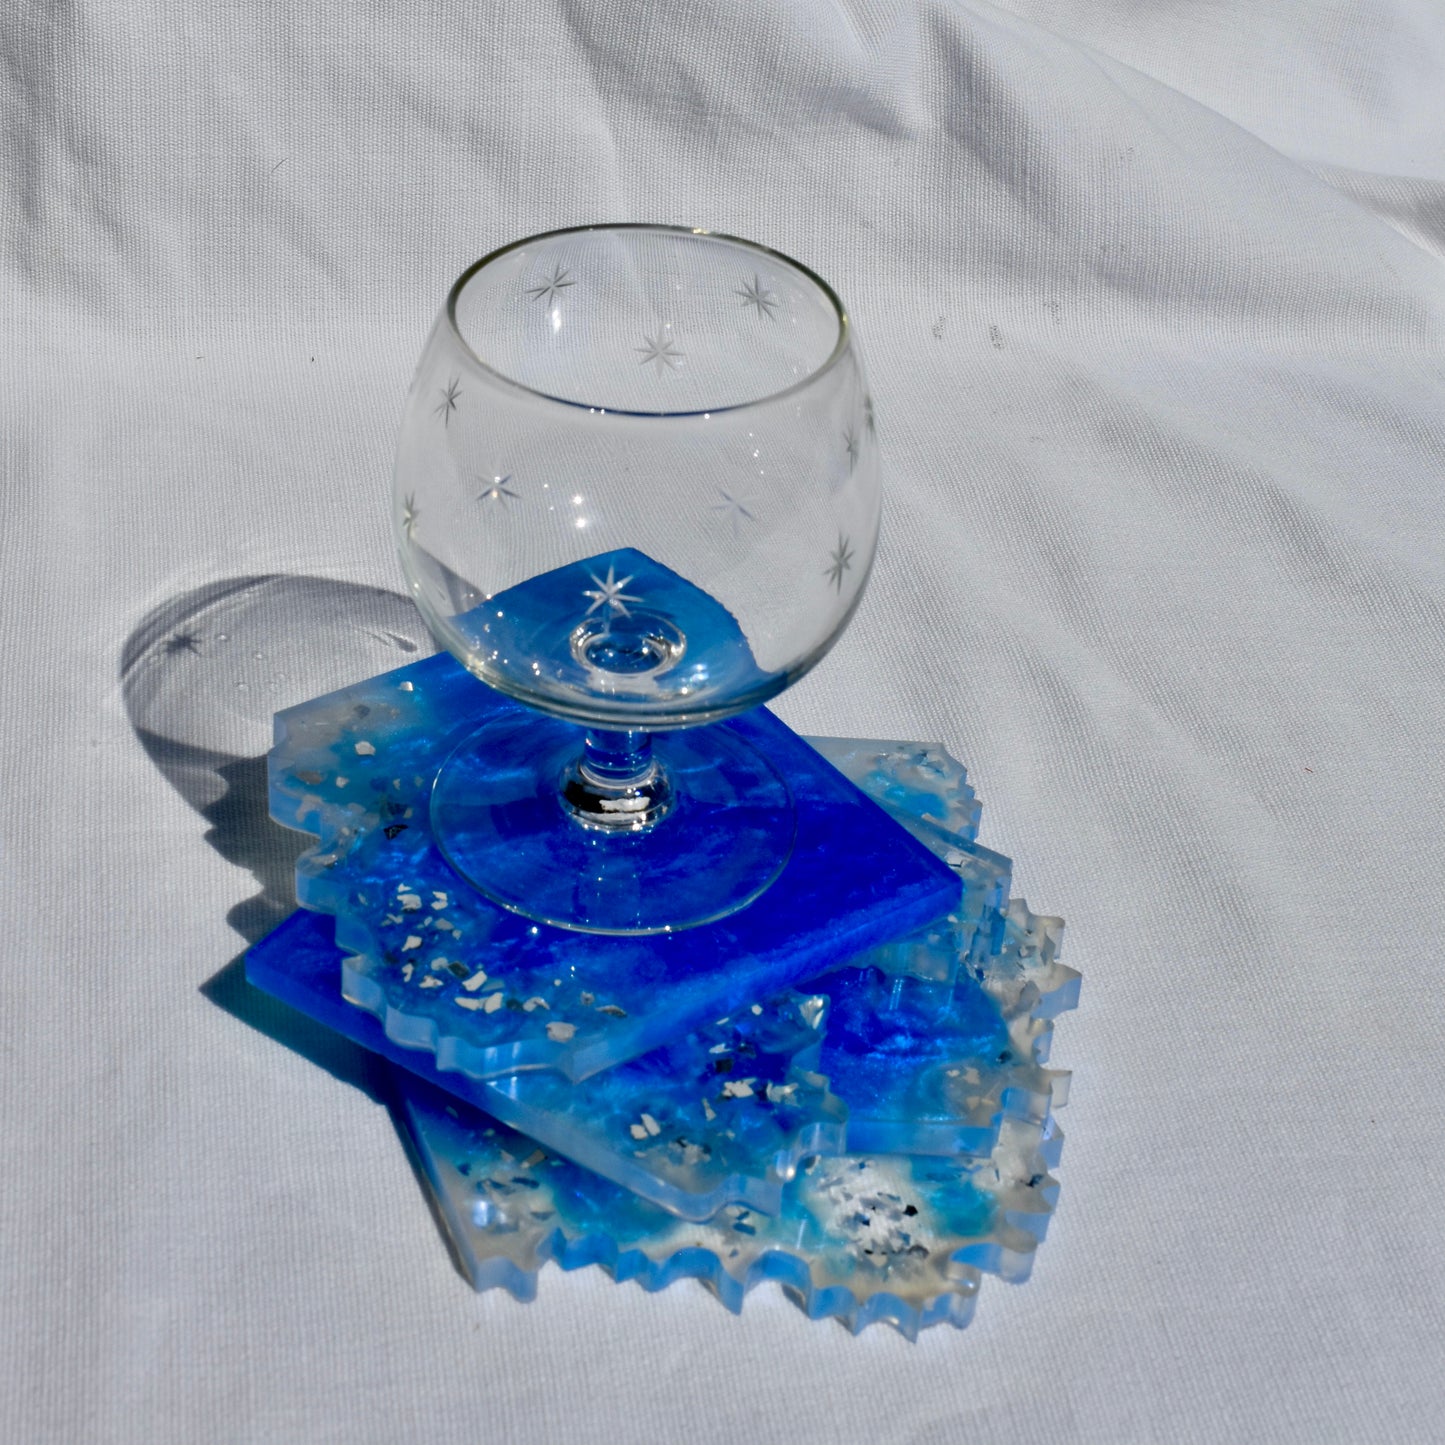 Blue & White Coasters with Stand • Sapphire & Winter White Coasters • Blue Wave Edge Coaster Set